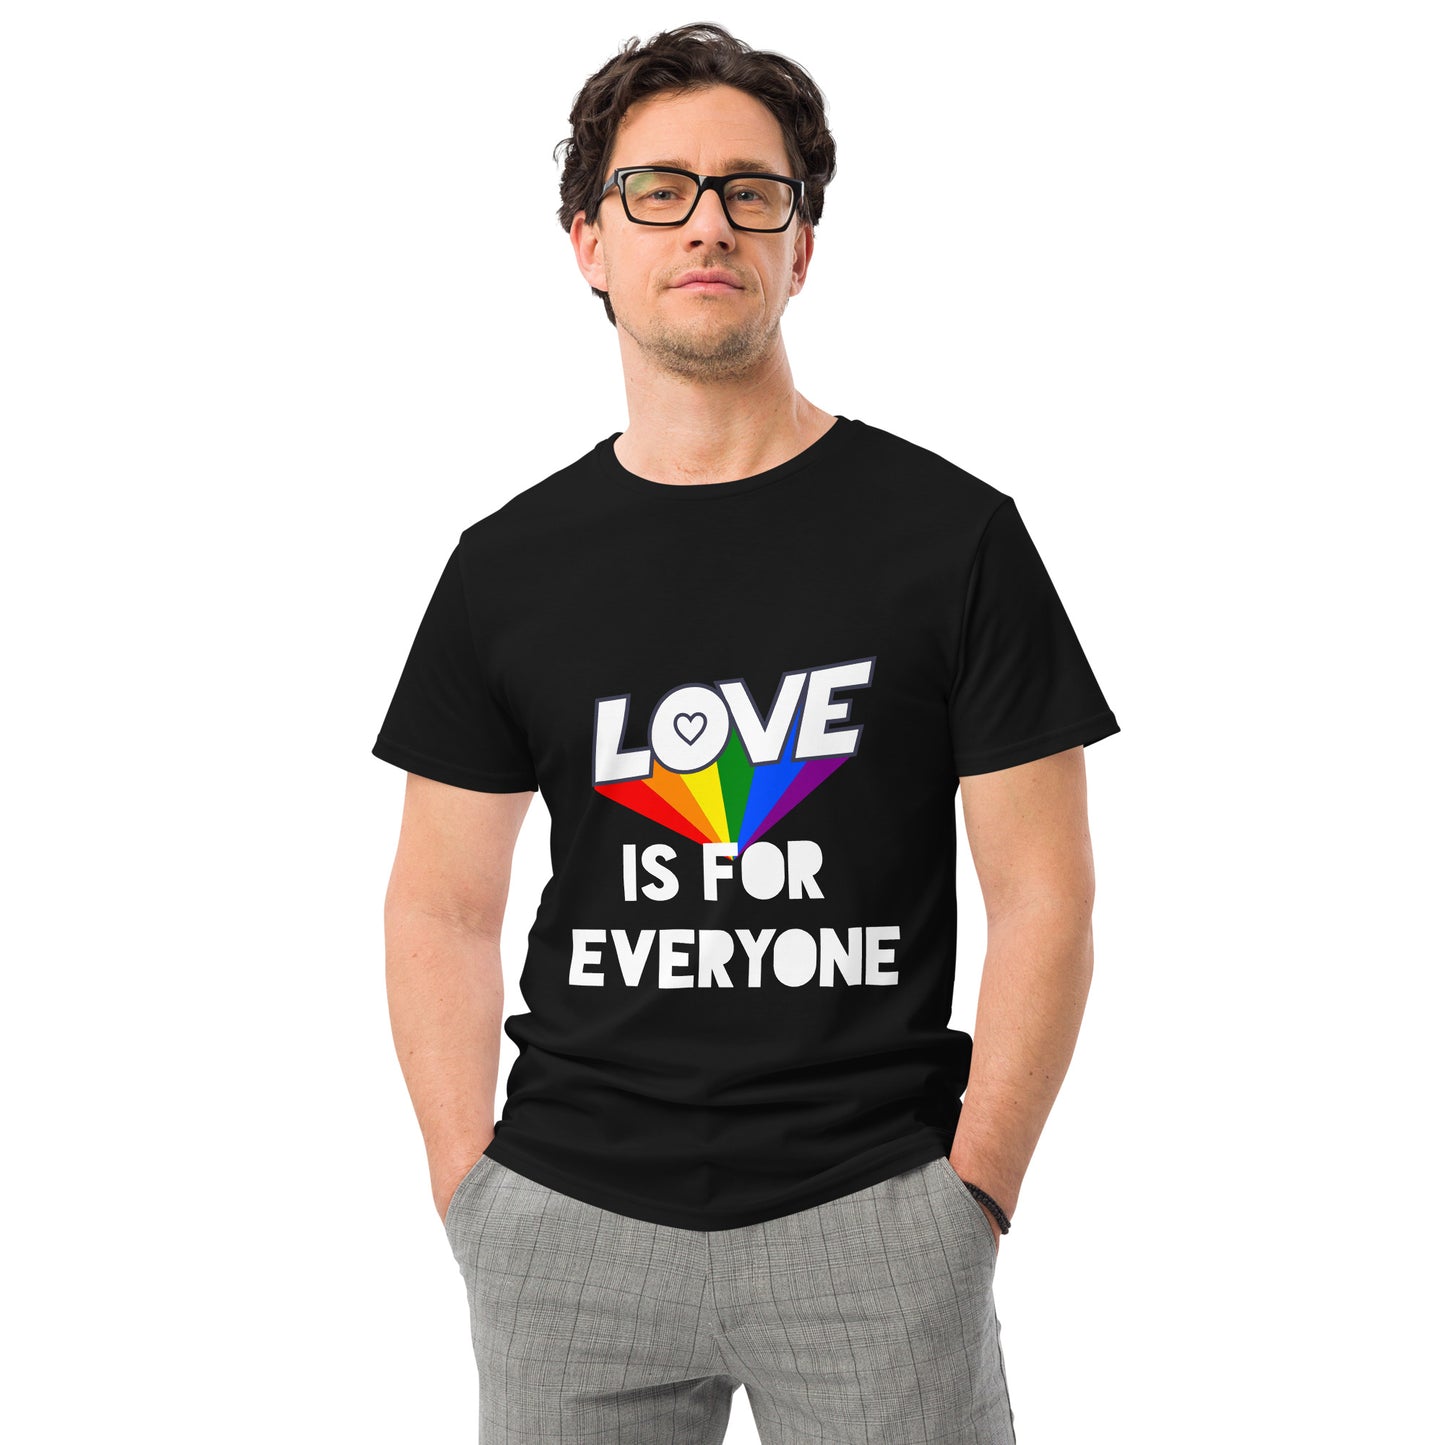 Love is for everyone, t-shirt